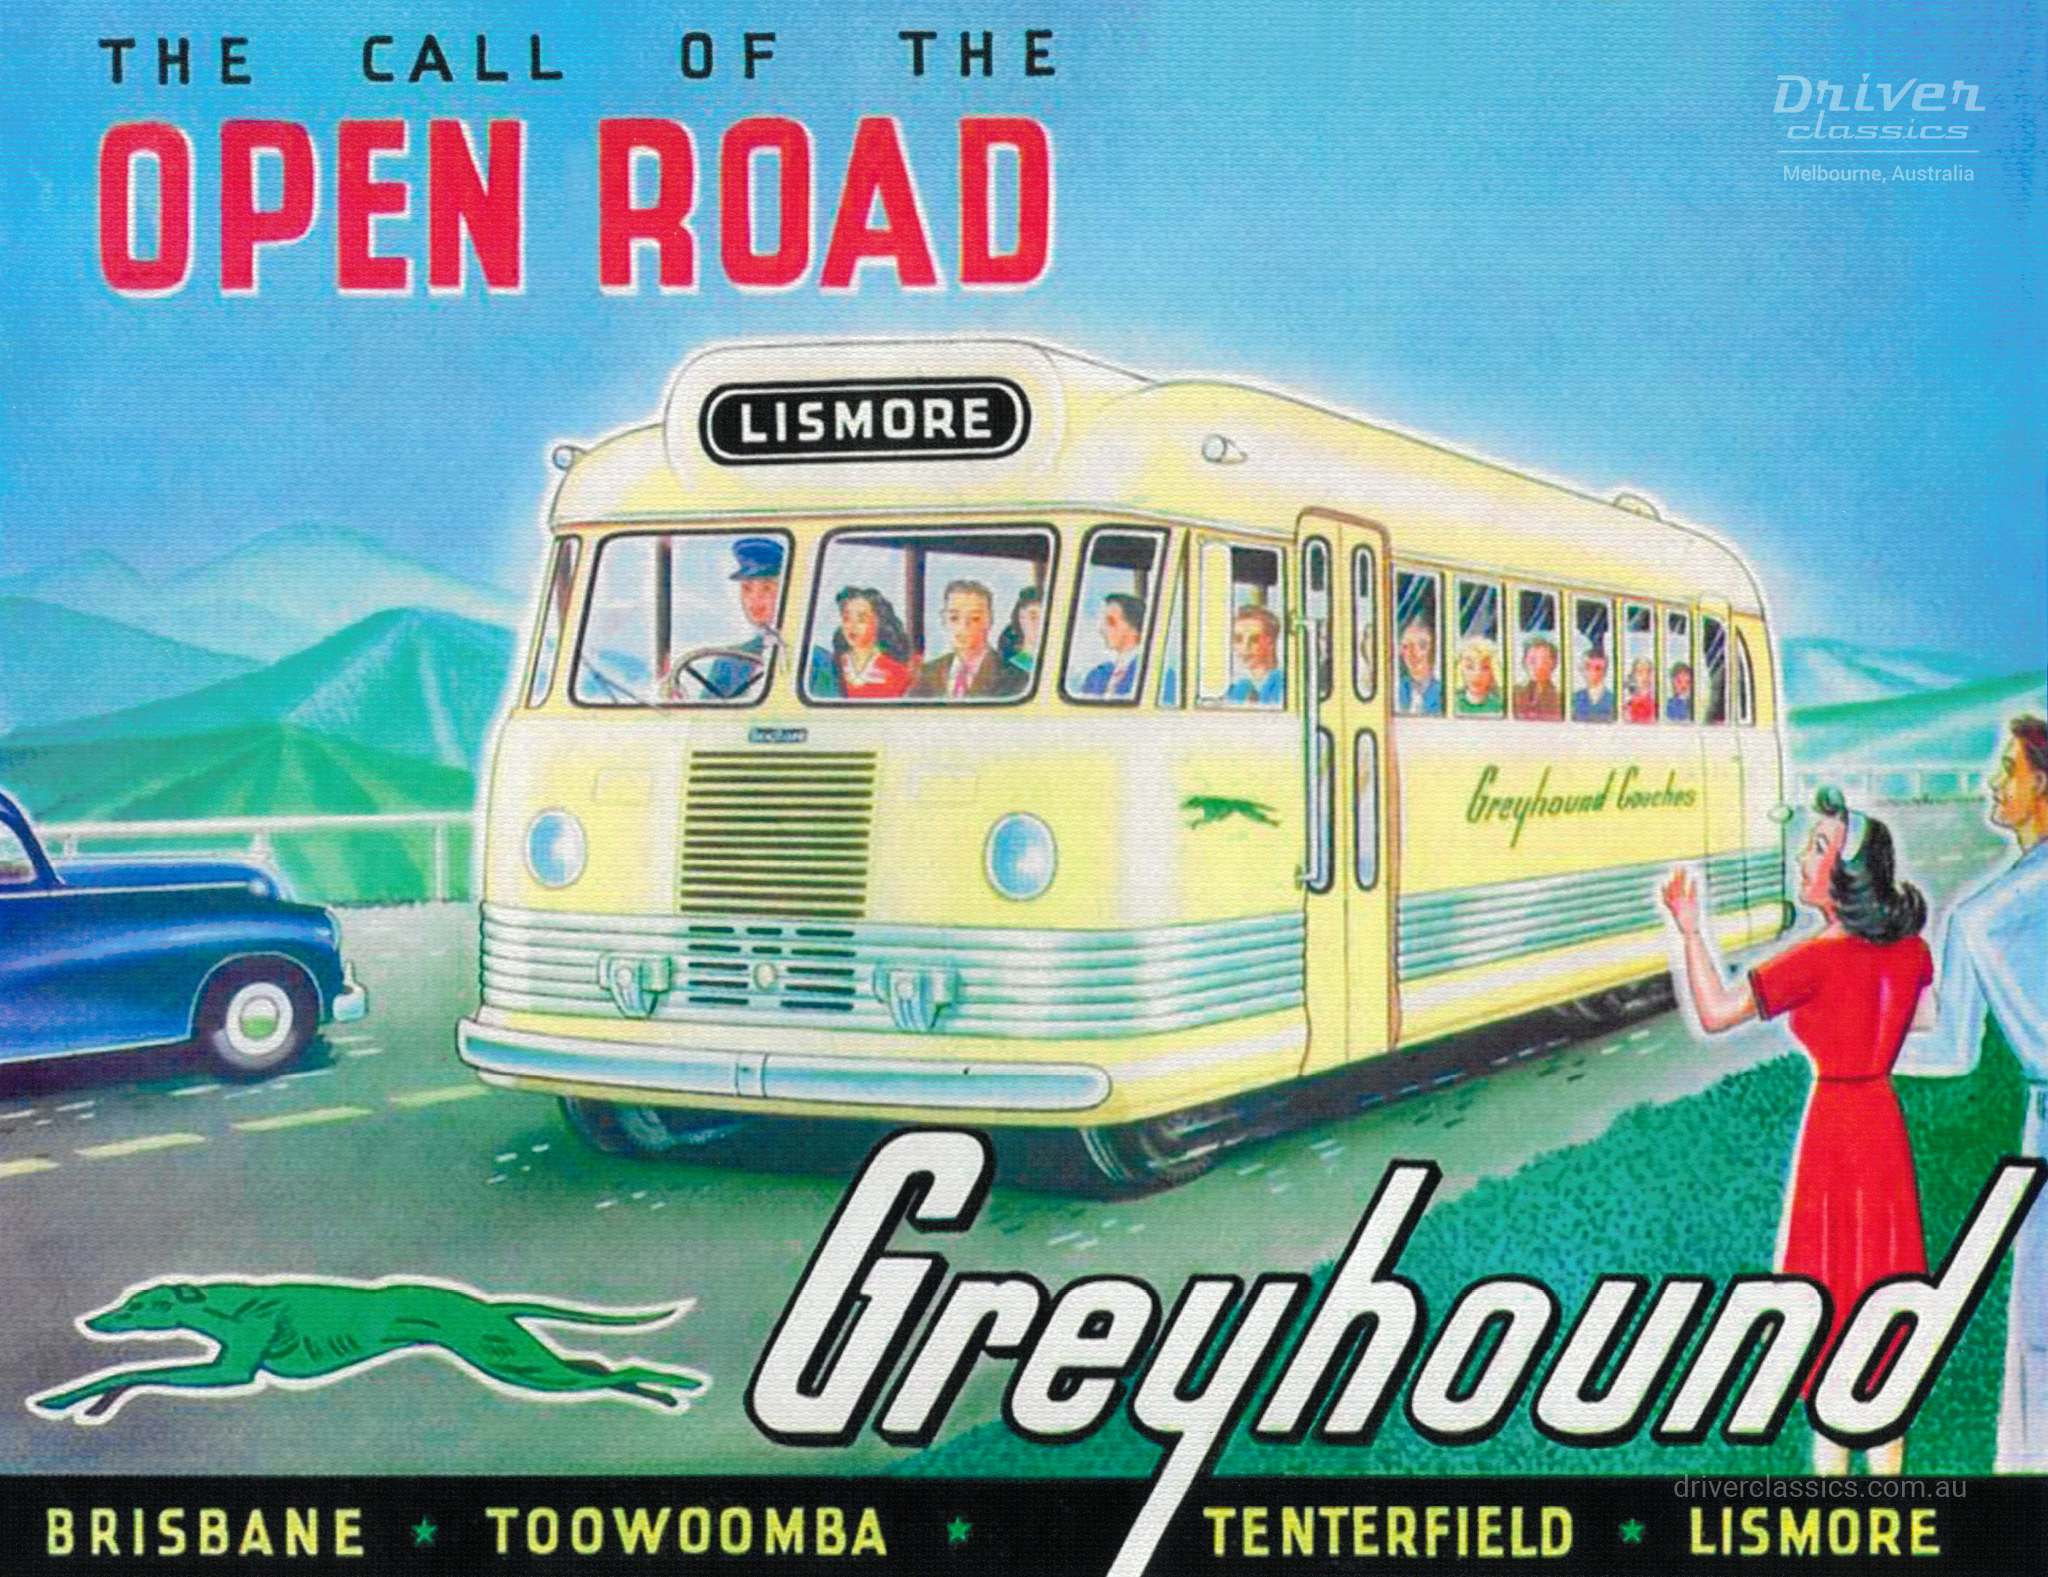 Bedford OB illustration, Greyhound Australia promotional advertising, late 1940s, The call of the open road.